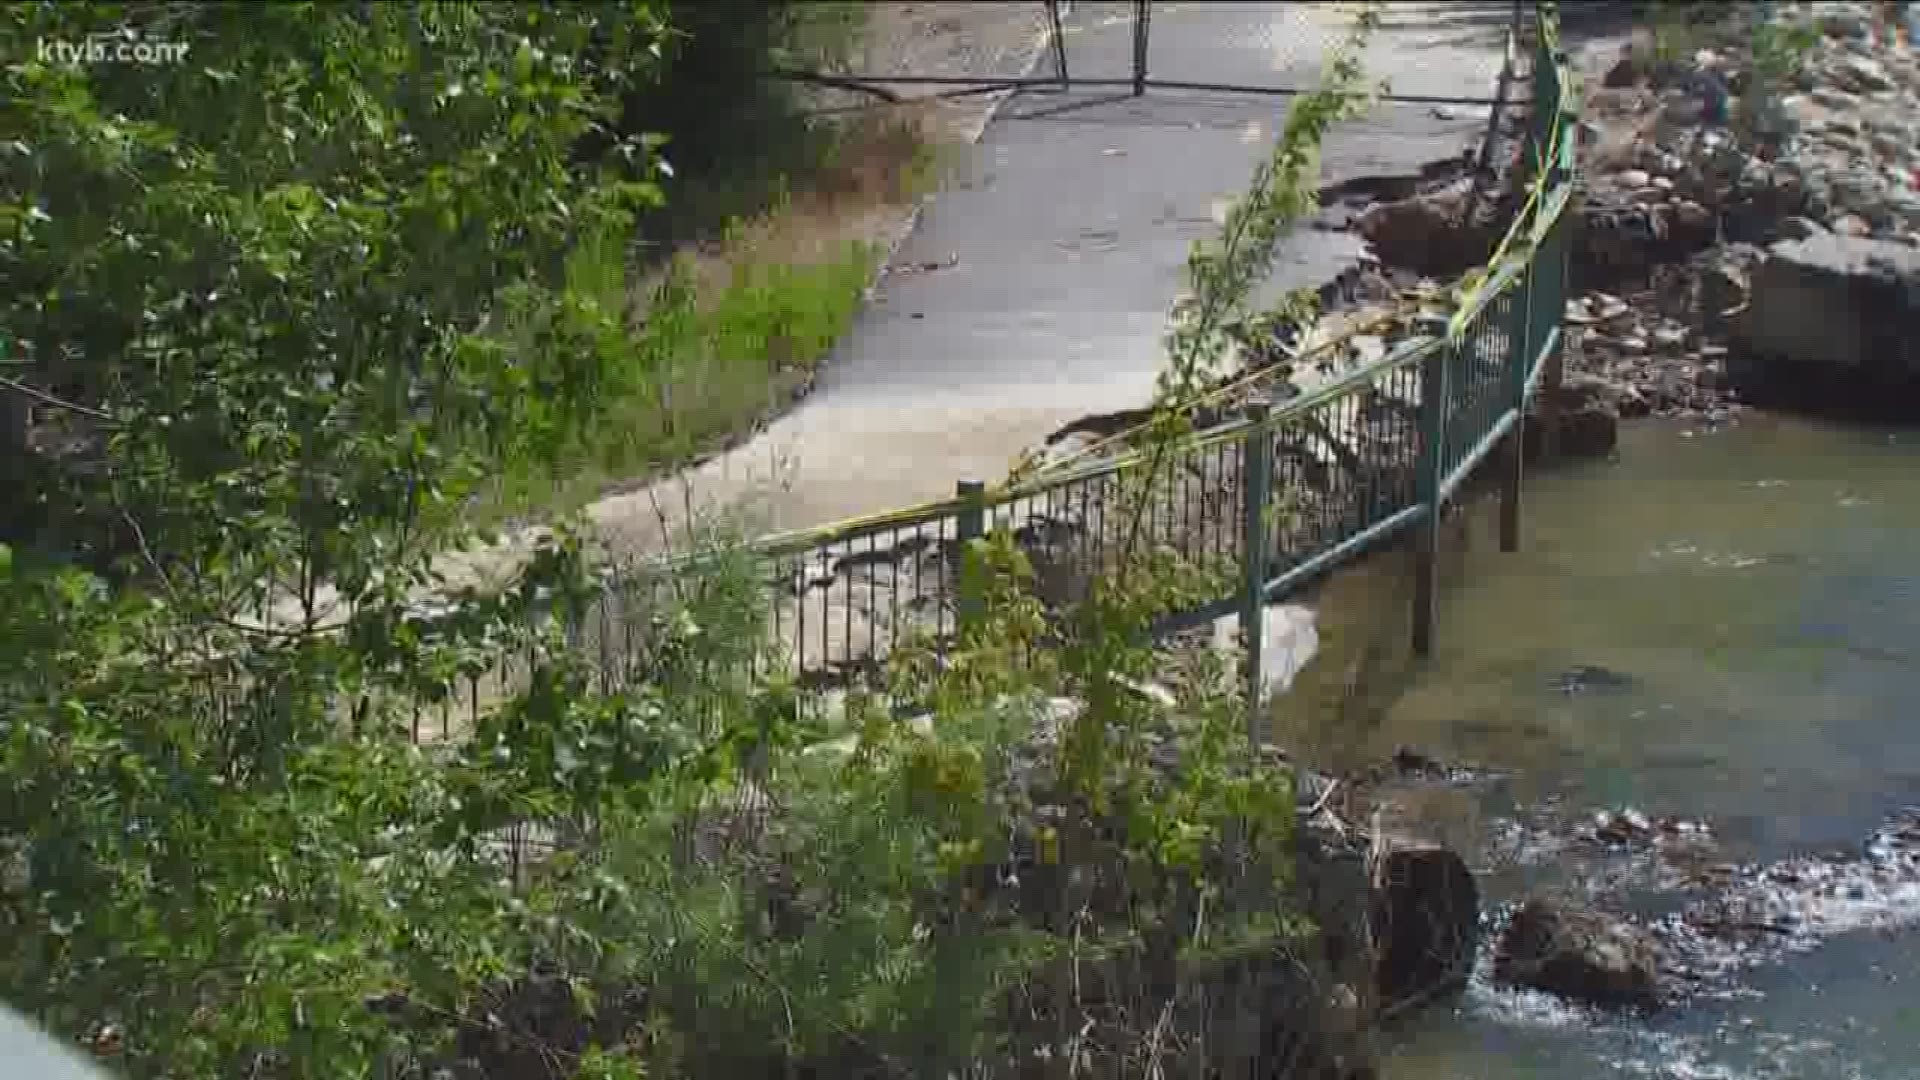 More than a year after historic flooding damaged and eroded parts of the Boise Greenbelt in the spring of 2017, the first repair project is poised to begin.